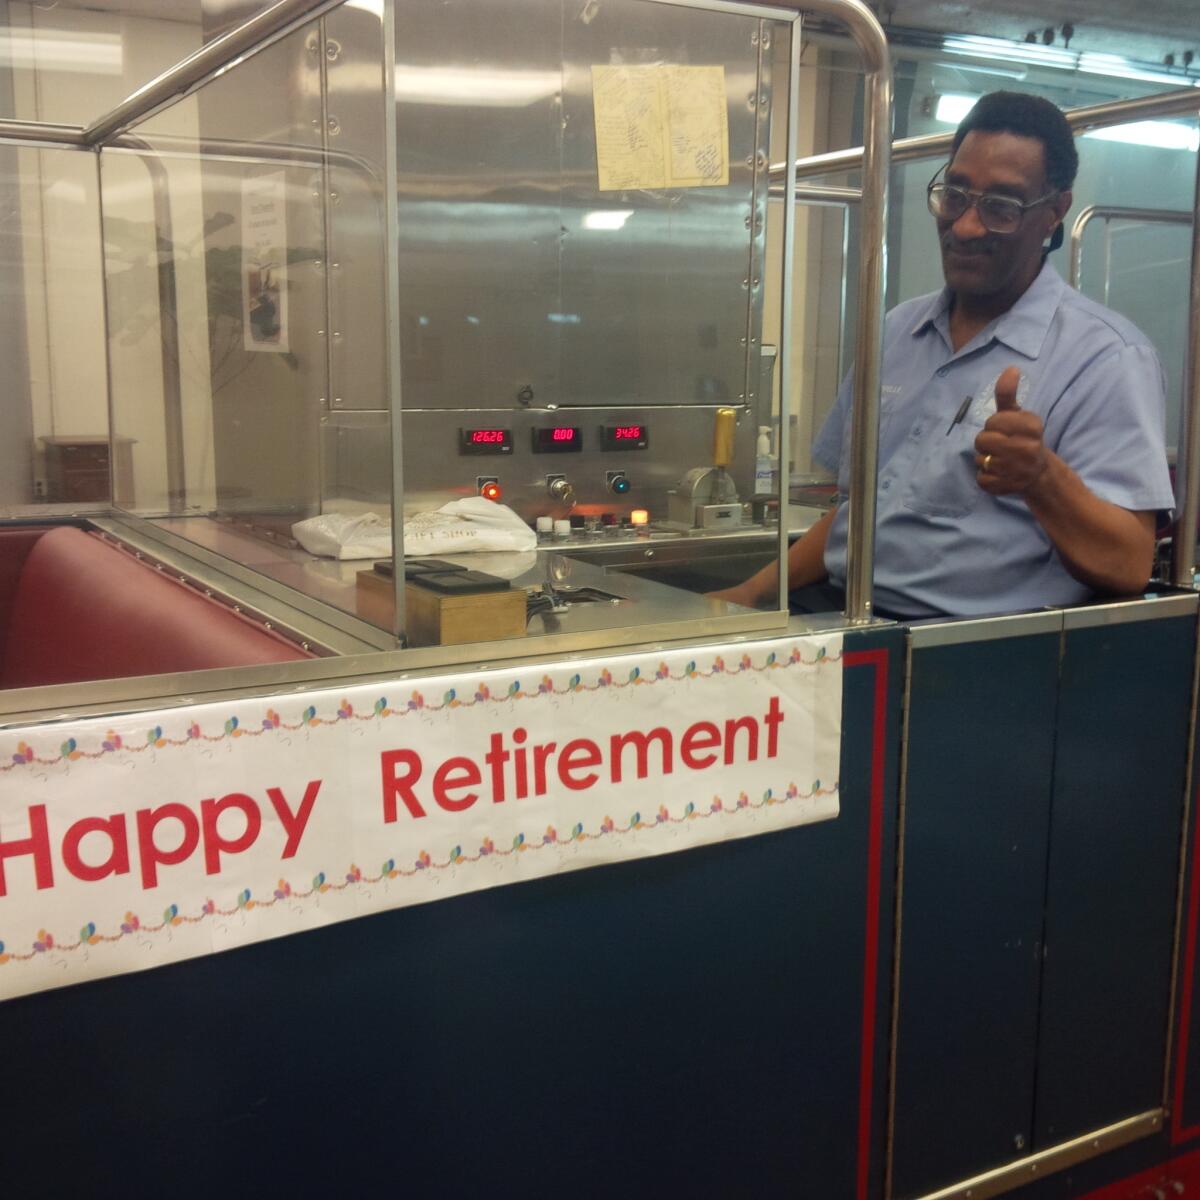 Washington subway operator Daryl Chappelle offers a thumbs-up on his final day. As one senator put it, Chappelle, who retired after 41 years of service, was "the undisputed champion of making the most of a brief encounter."